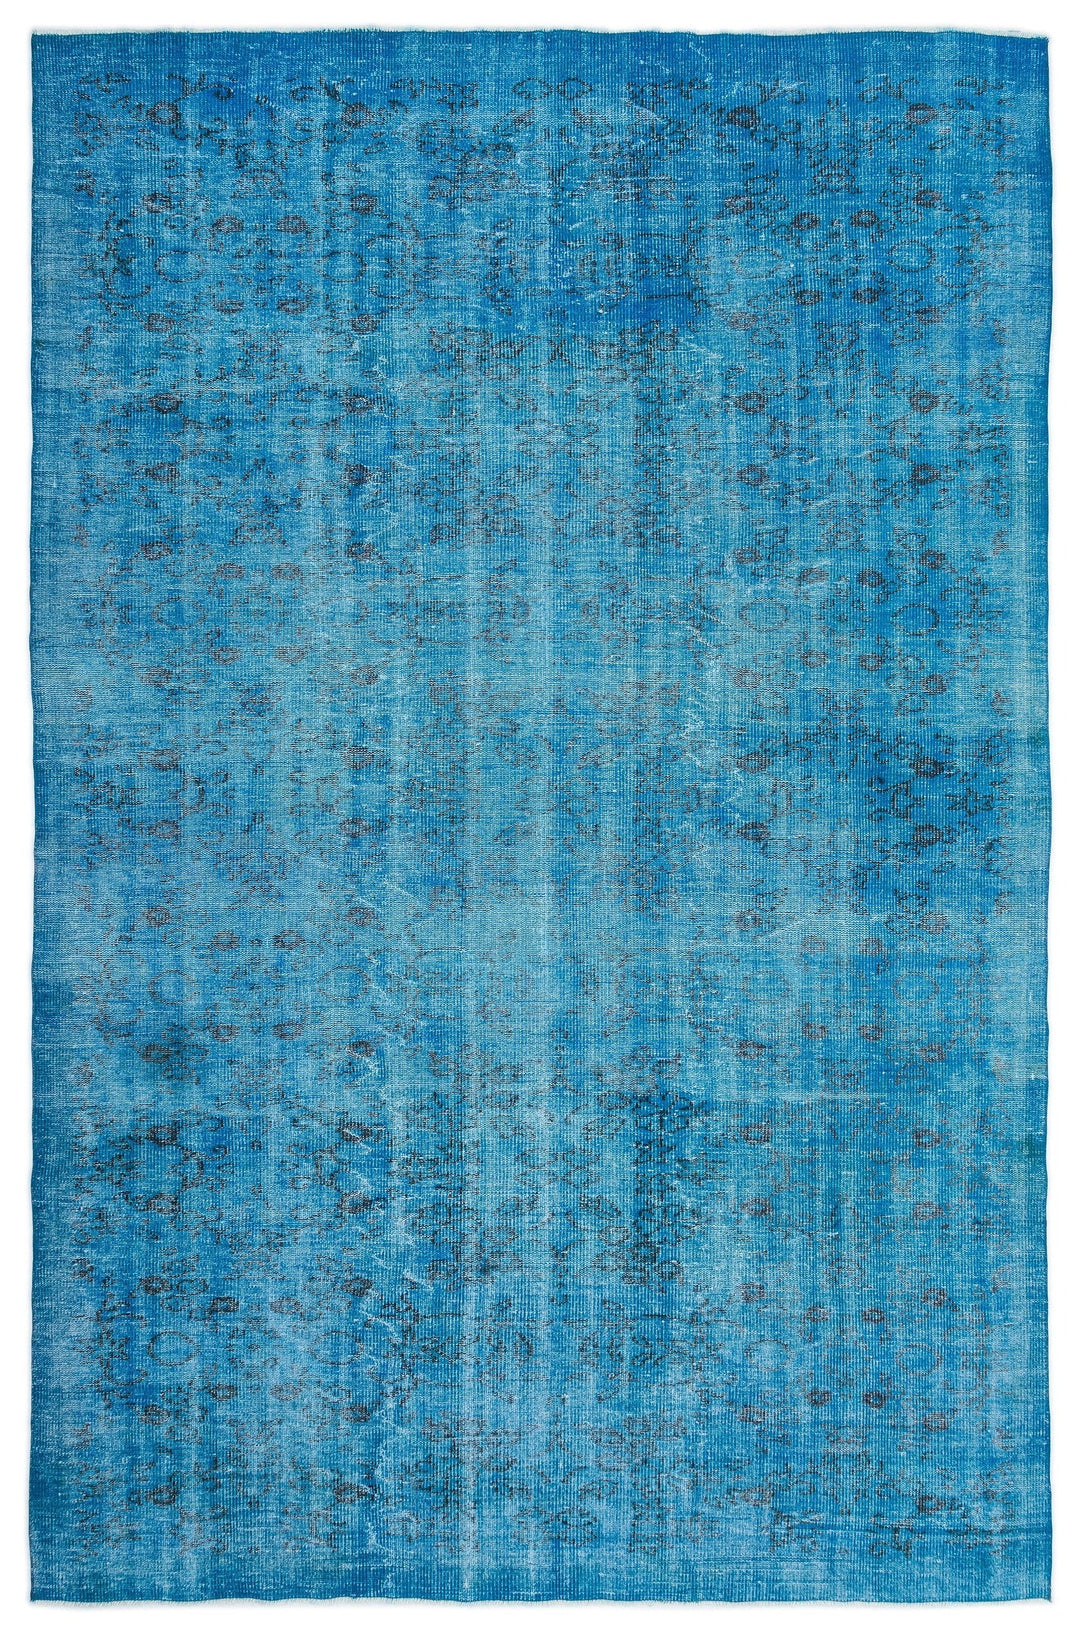 Athens Turquoise Tumbled Wool Hand Woven Carpet 211 x 323